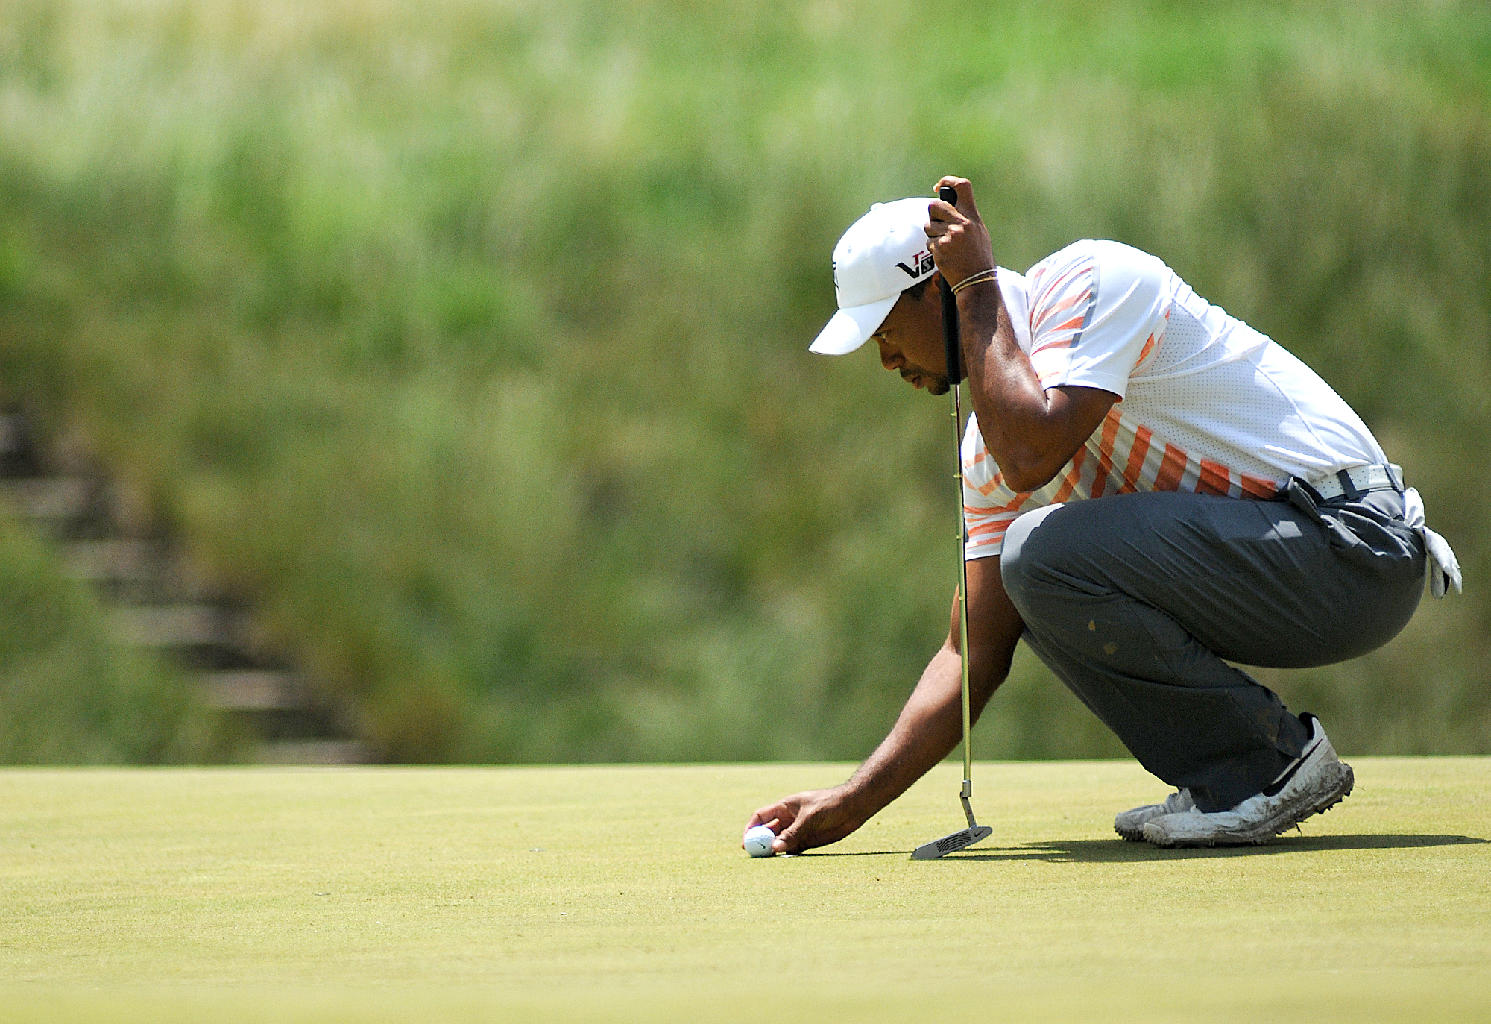  Tiger Woods prepares to put at Hole 17, a par of 3, during round 2 of the U.S. Open at Merion Golf Club. 